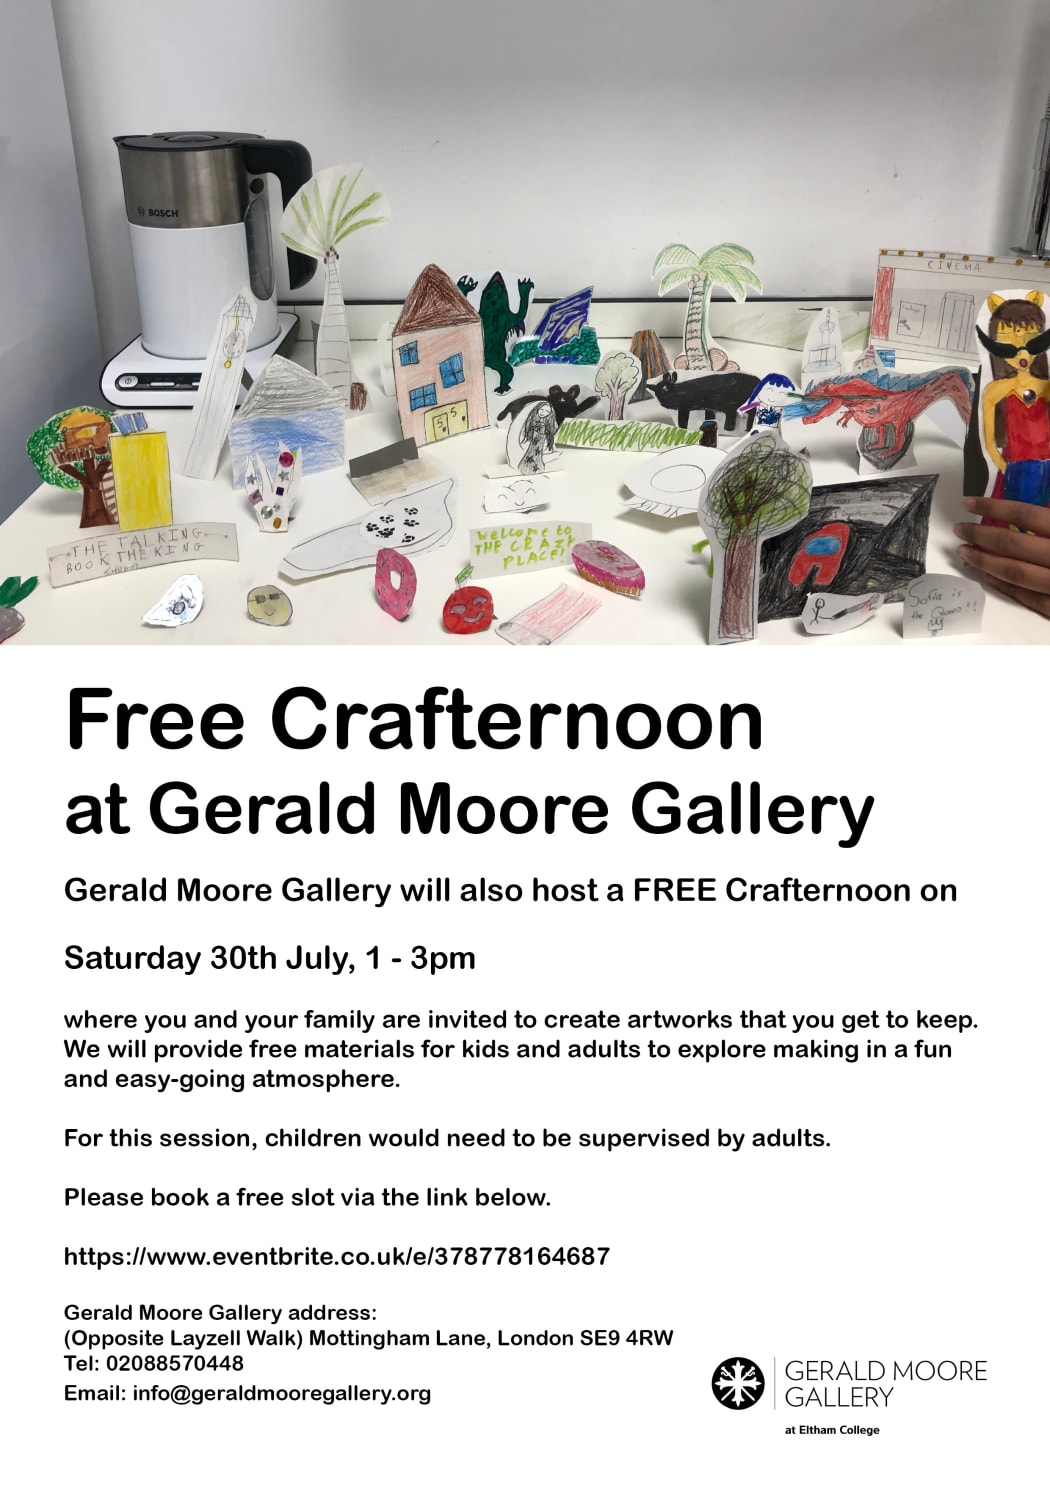 FREE CRAFTERNOON at Gerald Moore Gallery